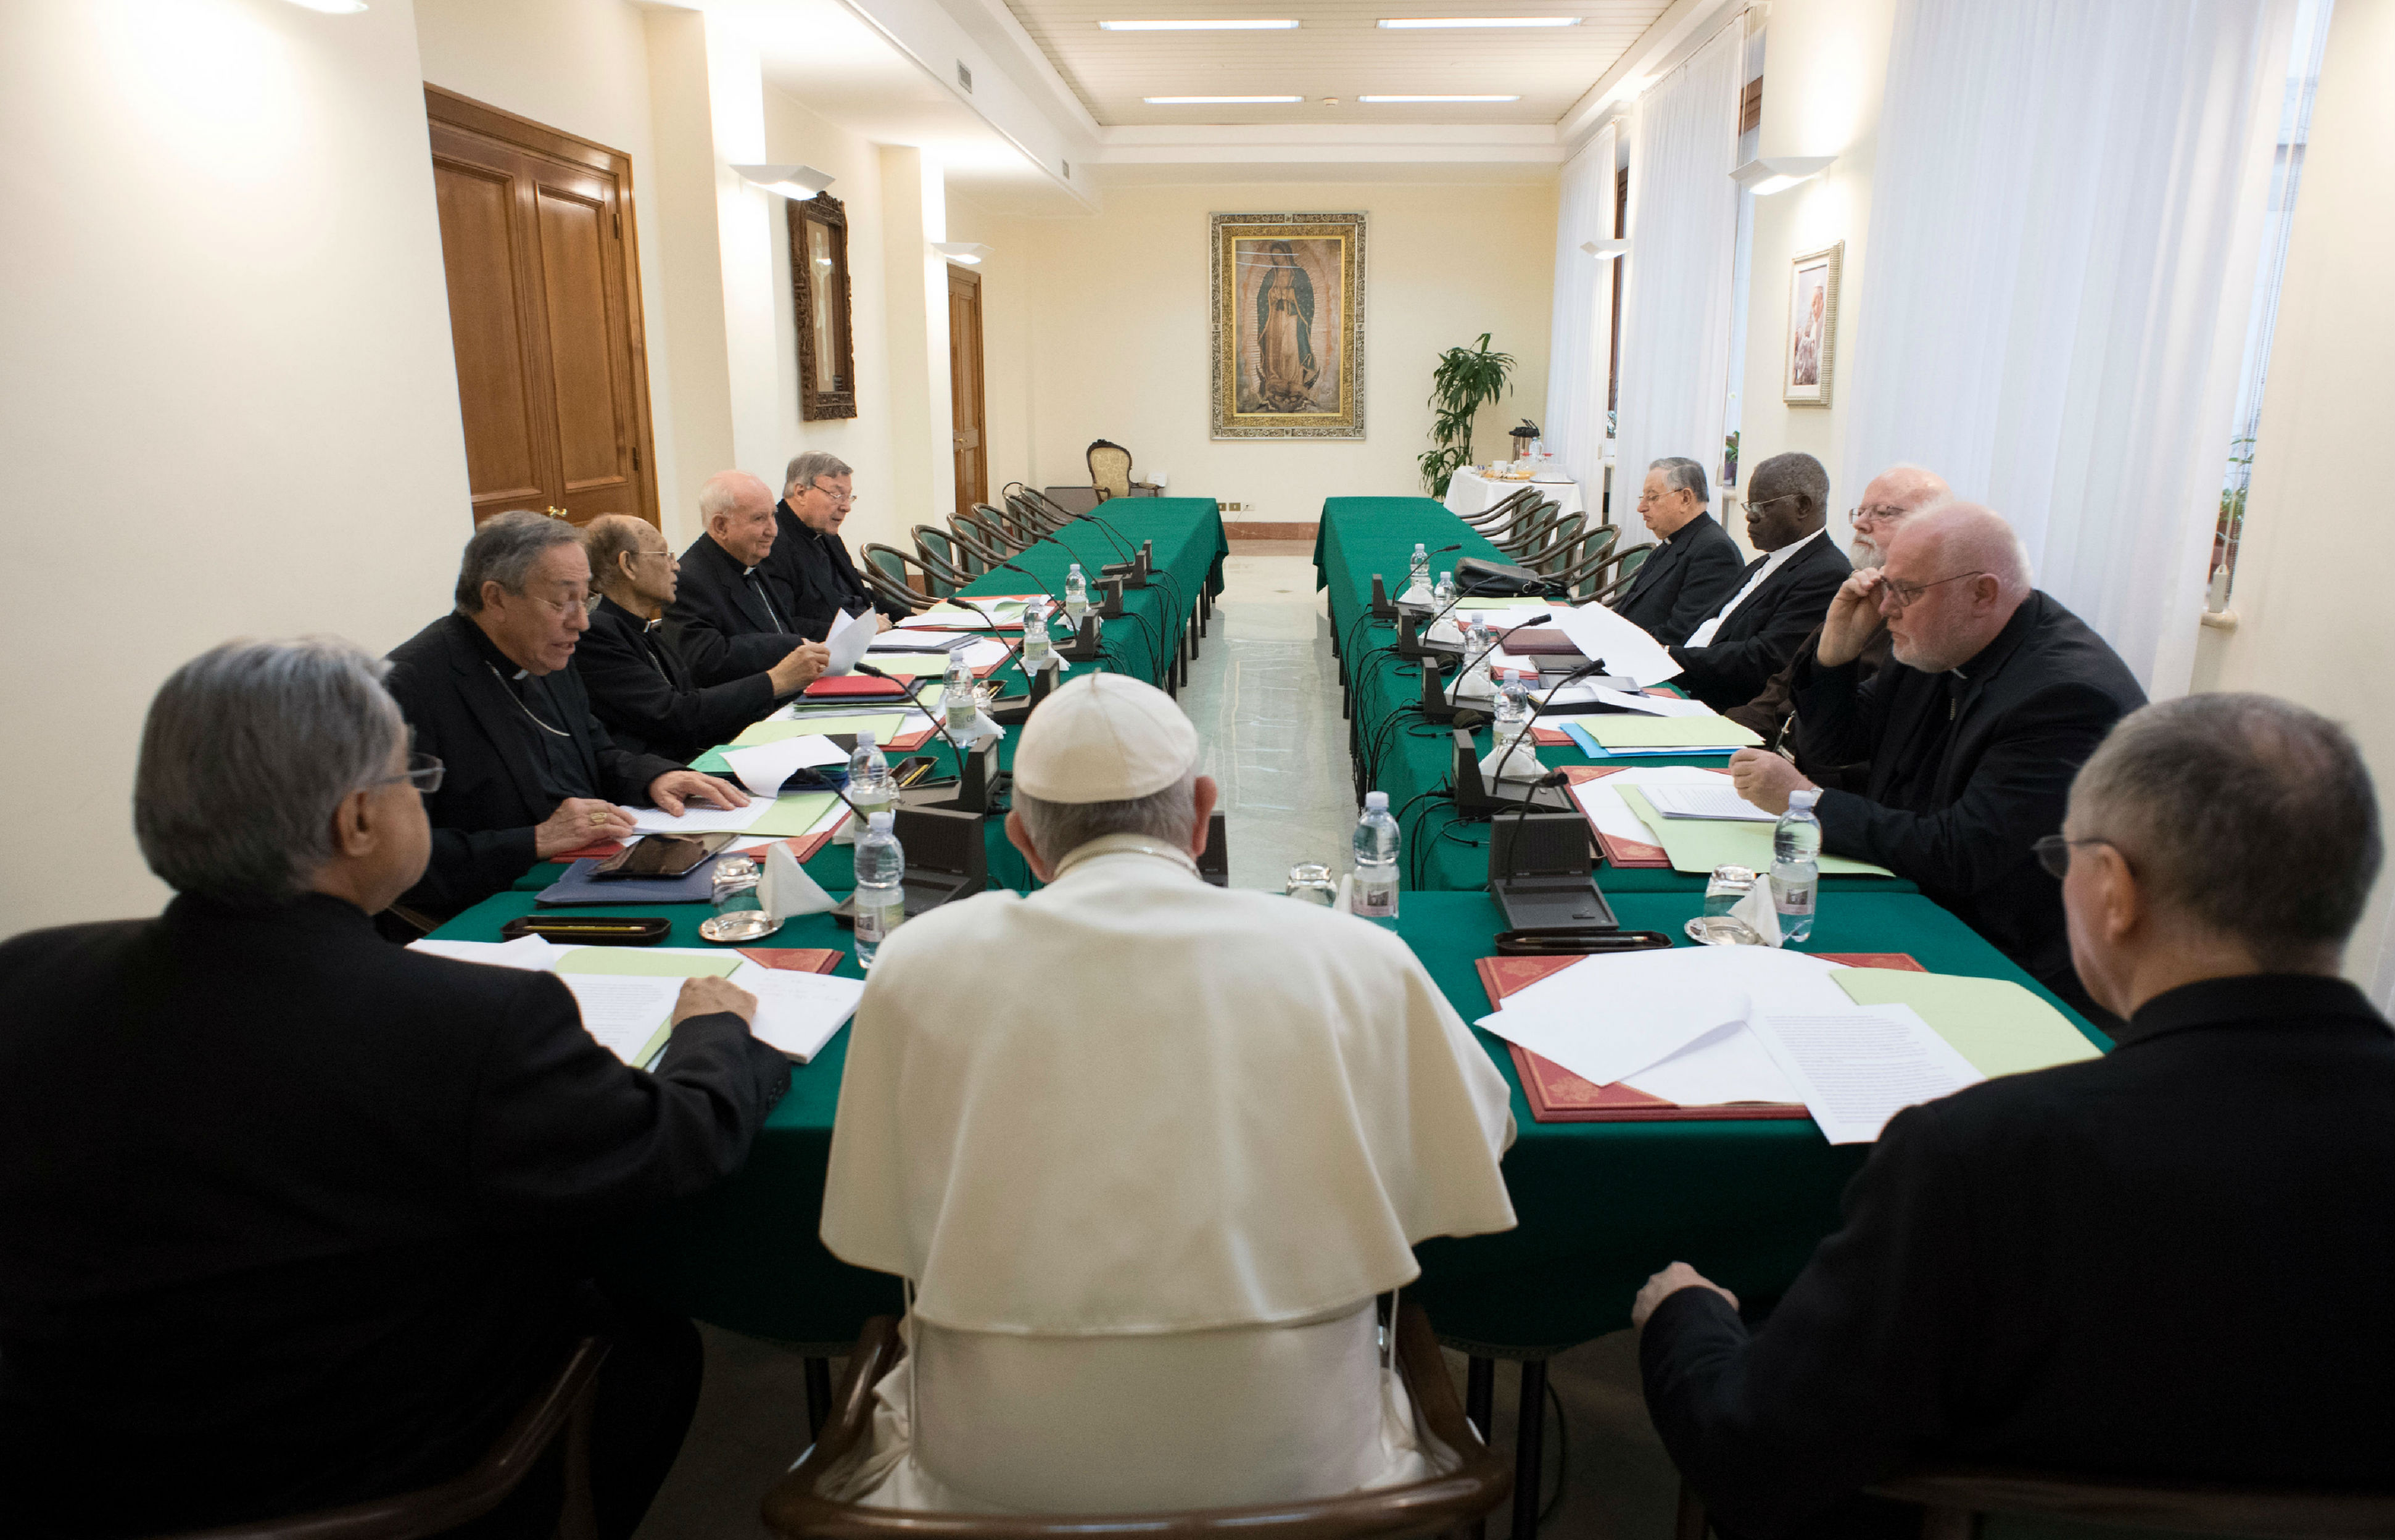 Vatican reform process 'nearly complete,' C9 member says